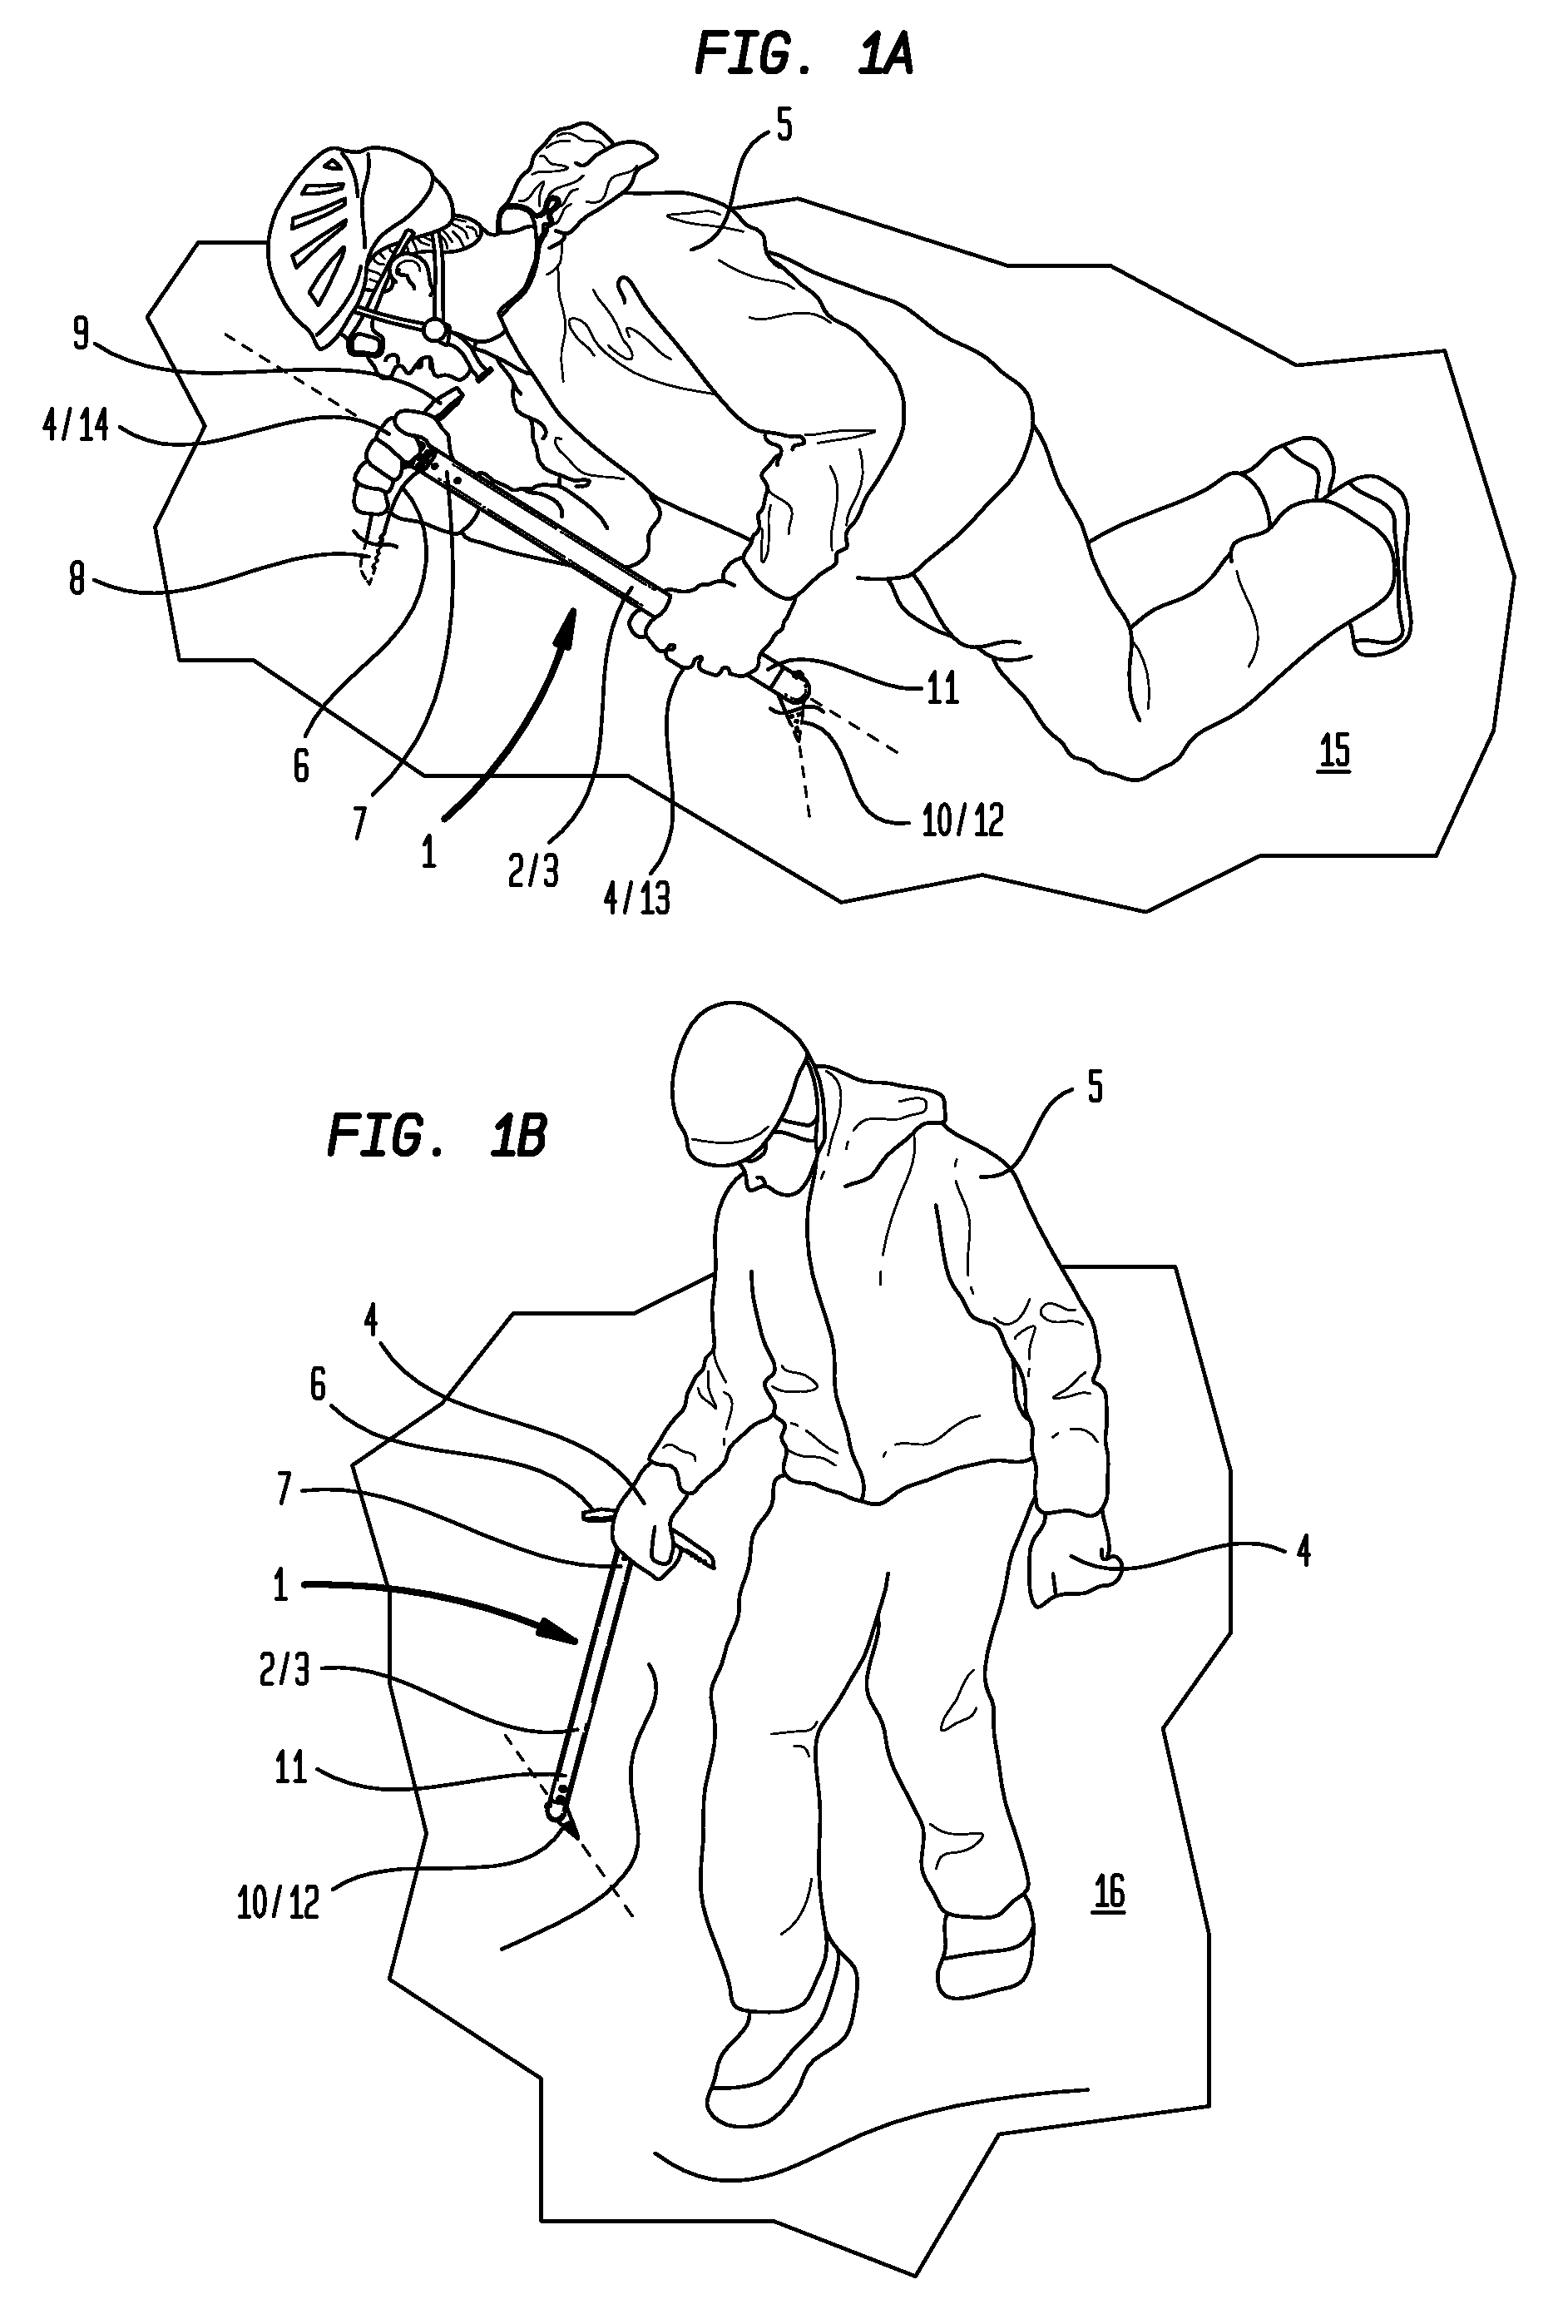 Multi-purpose ice axe including rotating spike